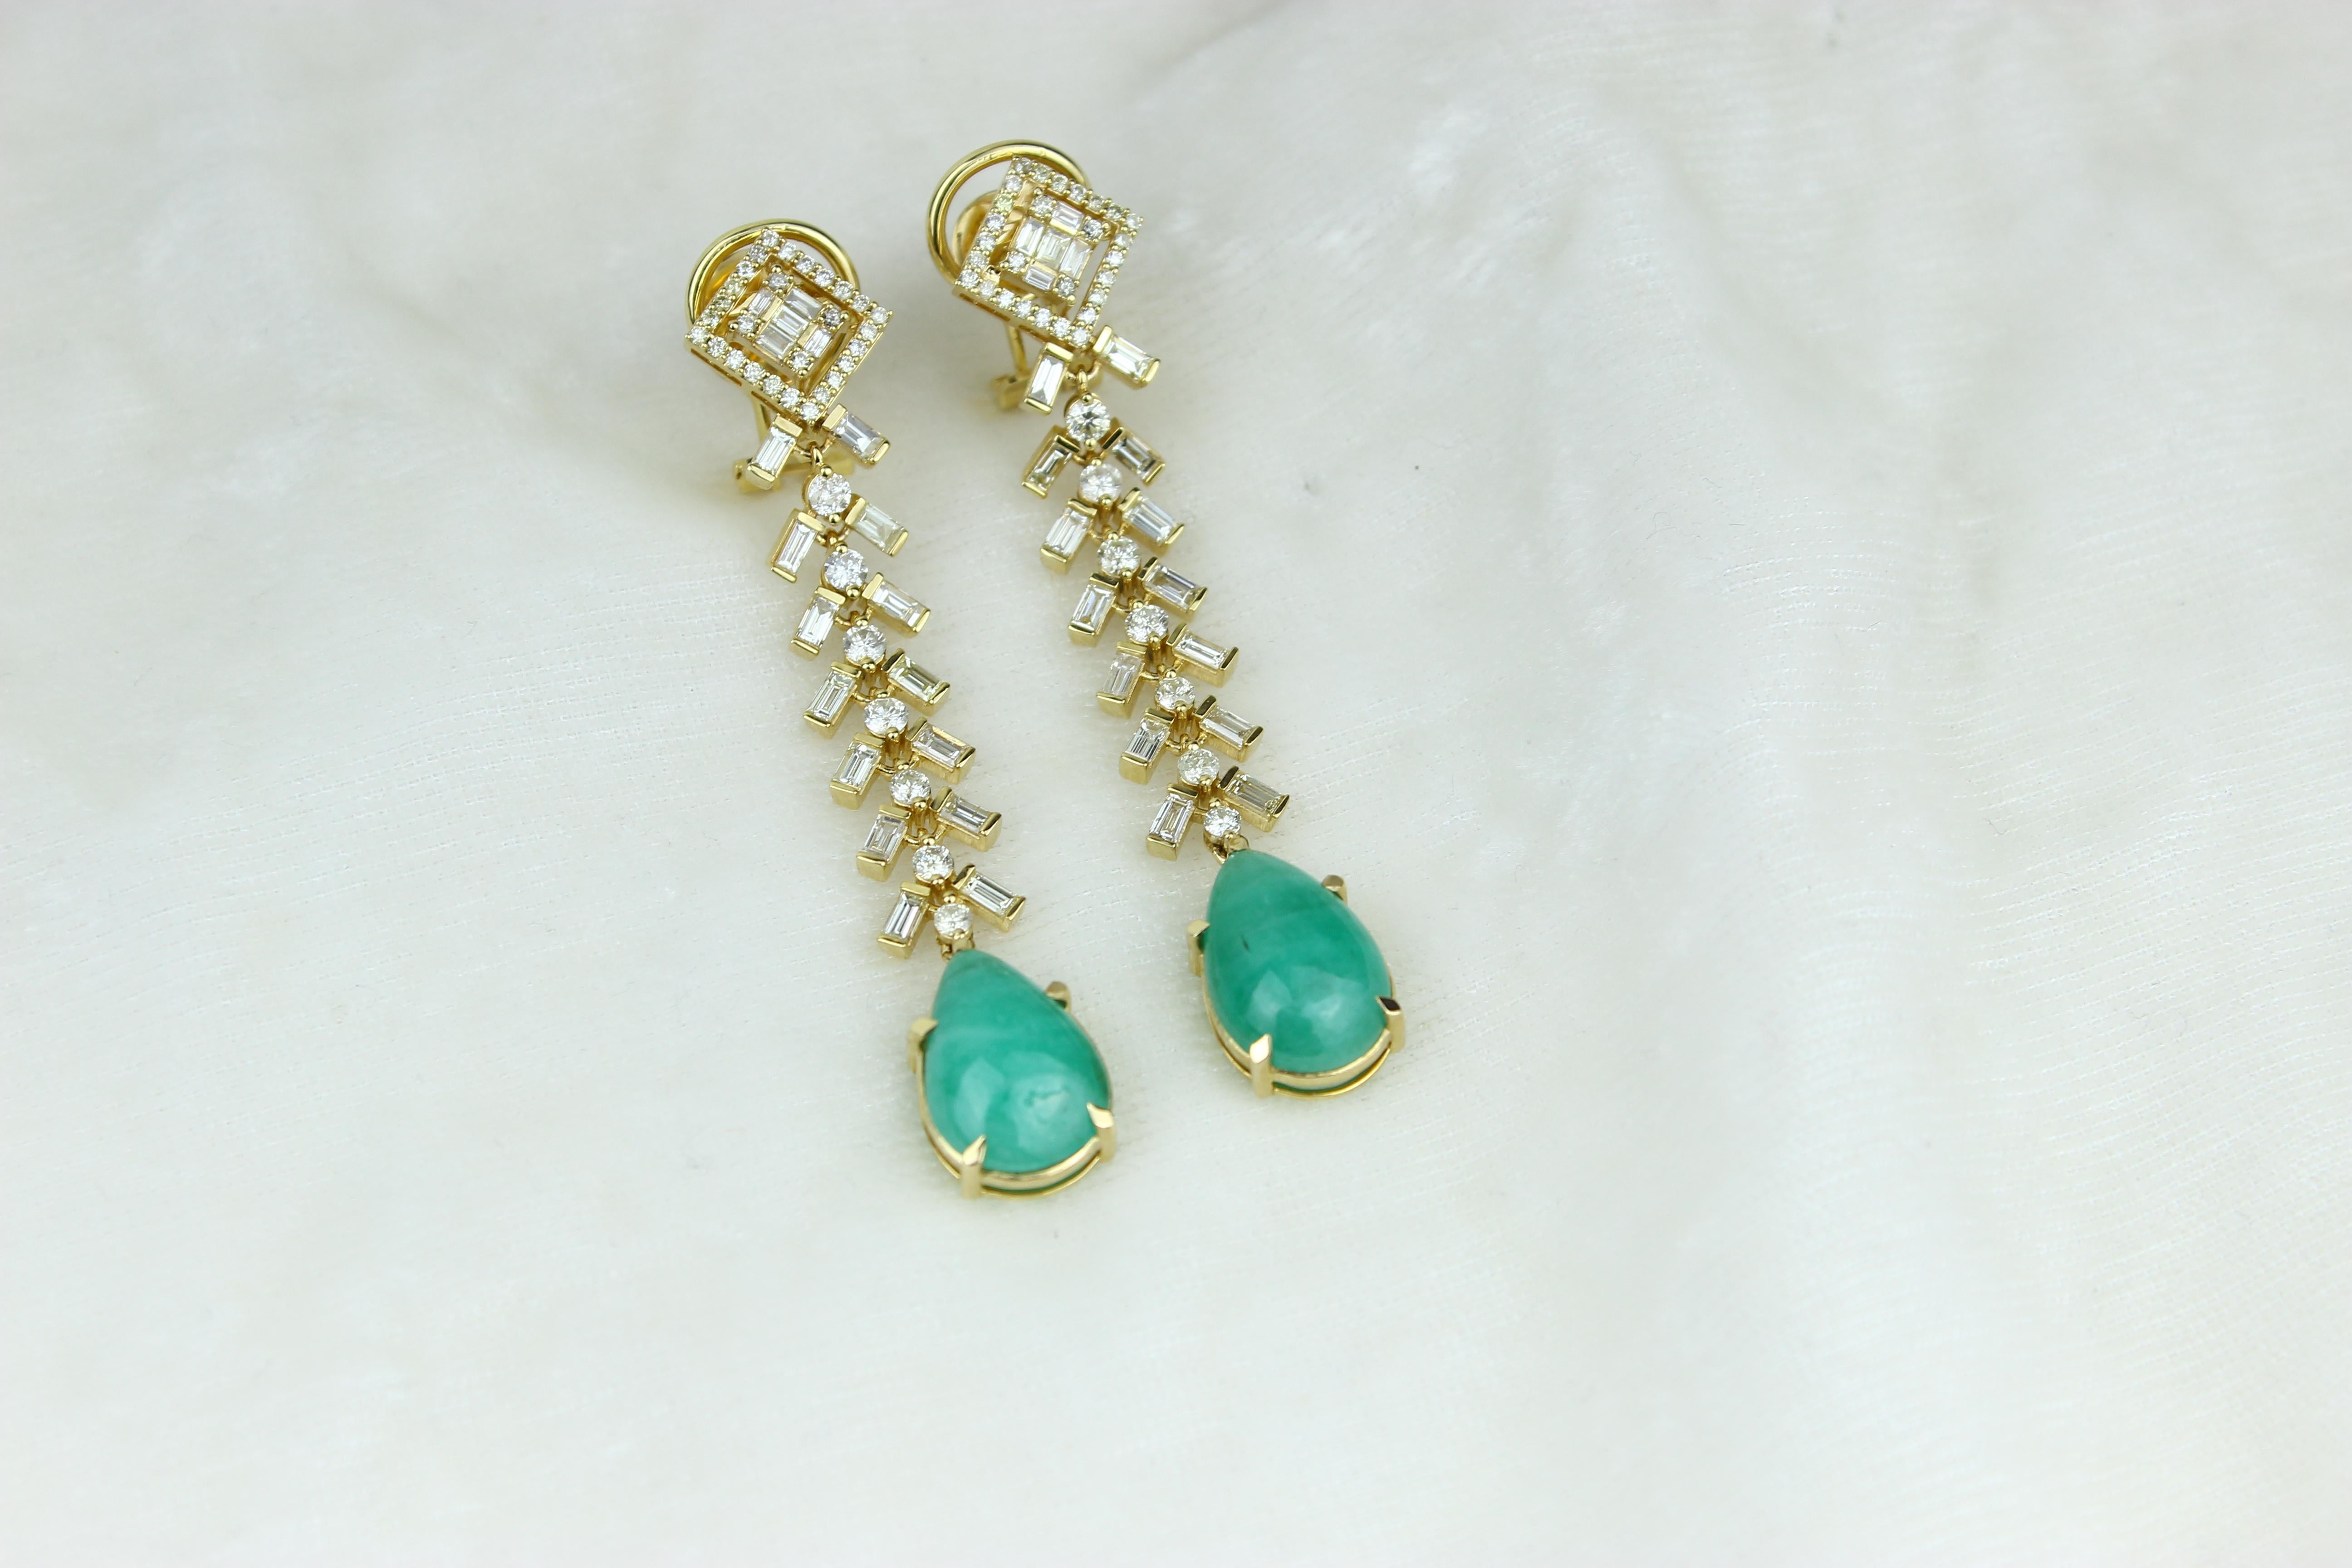 These Tear Drop Emerald Gemstone and Diamond Earrings feature high-quality emerald gemstones set in 18K solid gold and are adorned by baguettes and round diamonds. The elegant dangle drop style adds movement and dimension to the earrings, making